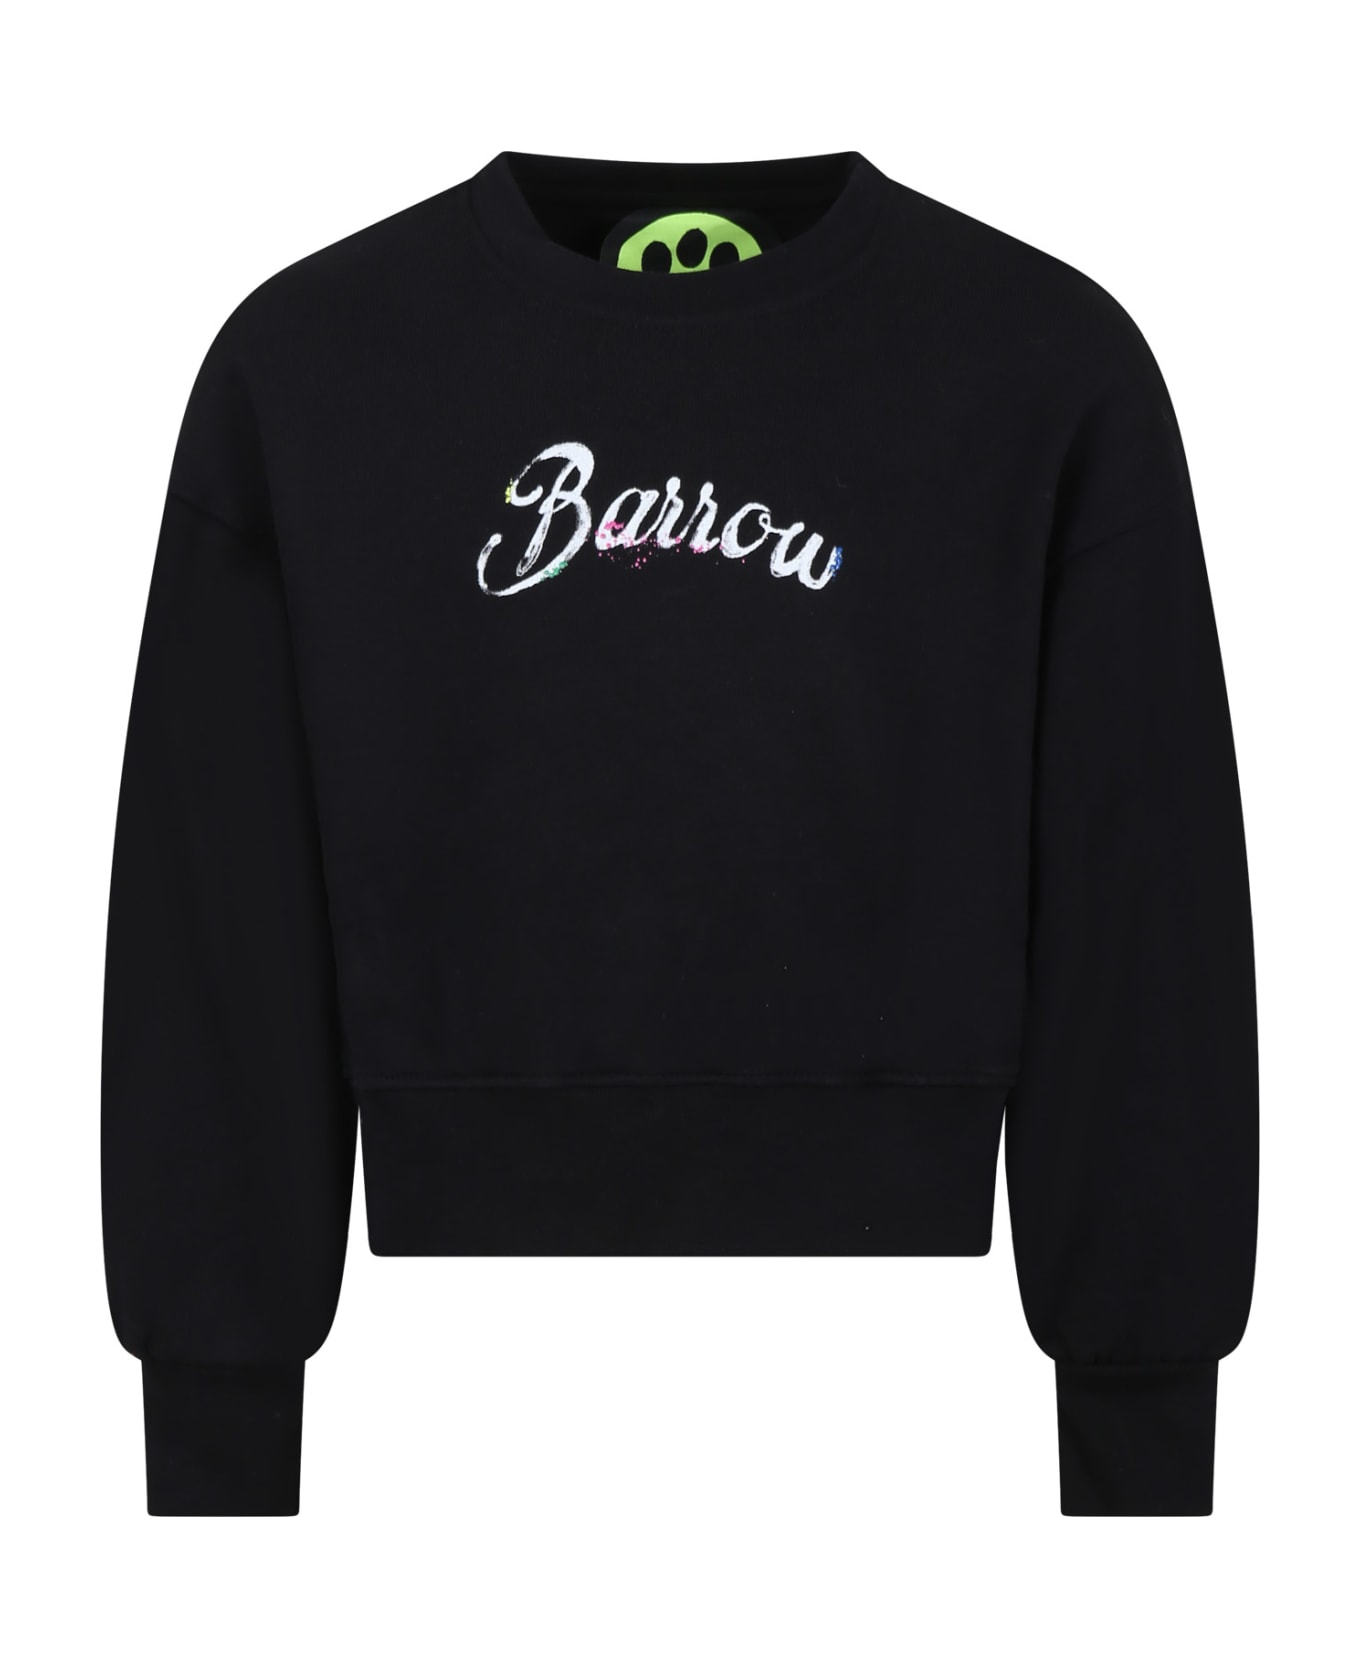 Barrow Black Sweatshirt For Girl With Smiley Face And Logo - Black